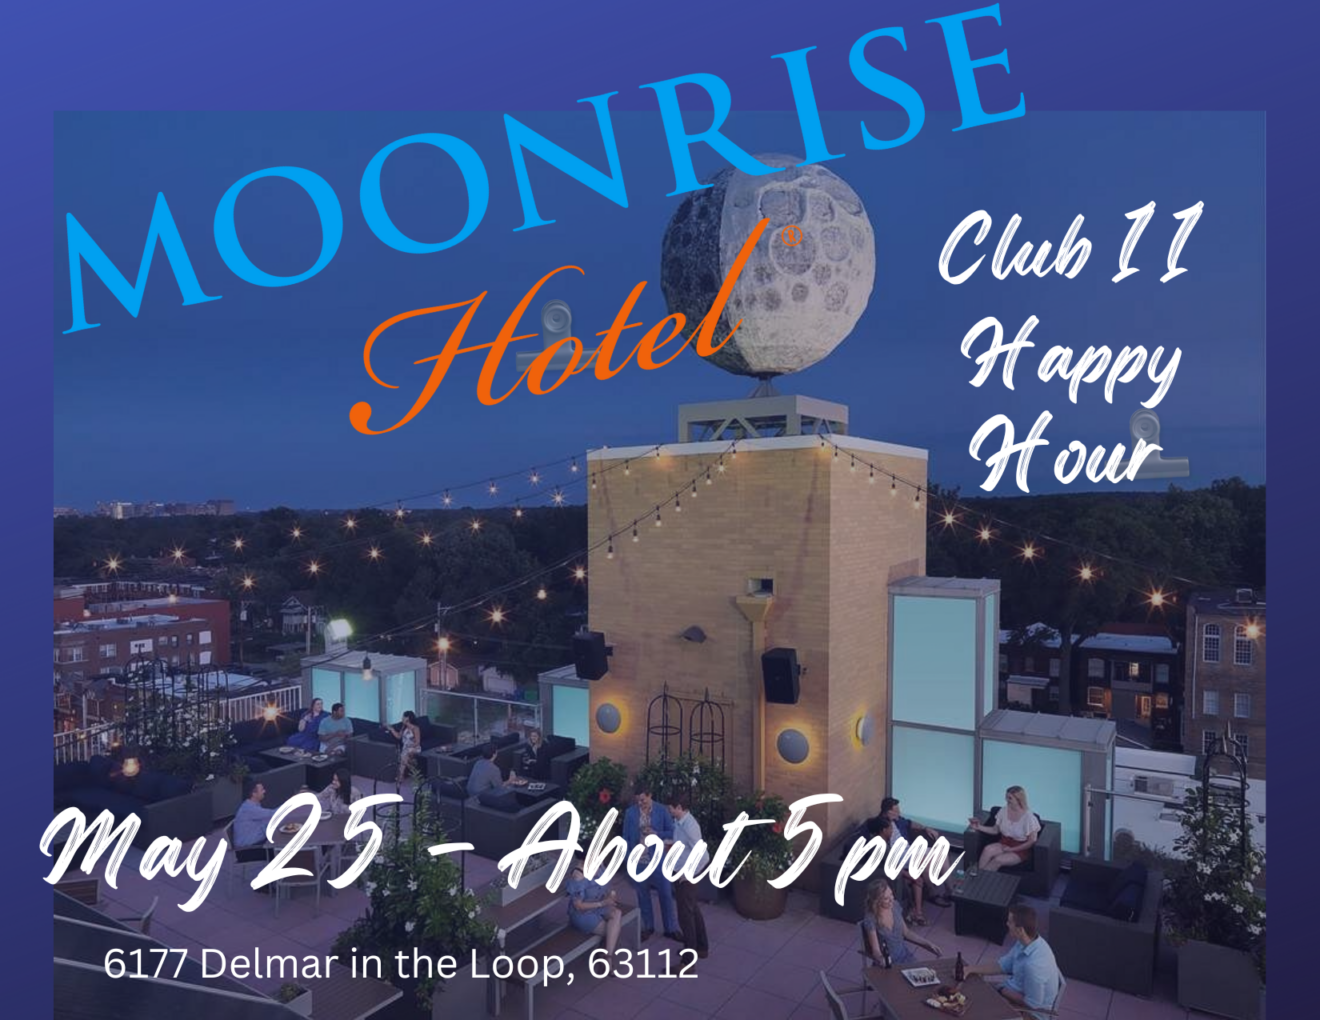 Club 11 Happy Hour is at Moonrise Hotel on May 25, 2023